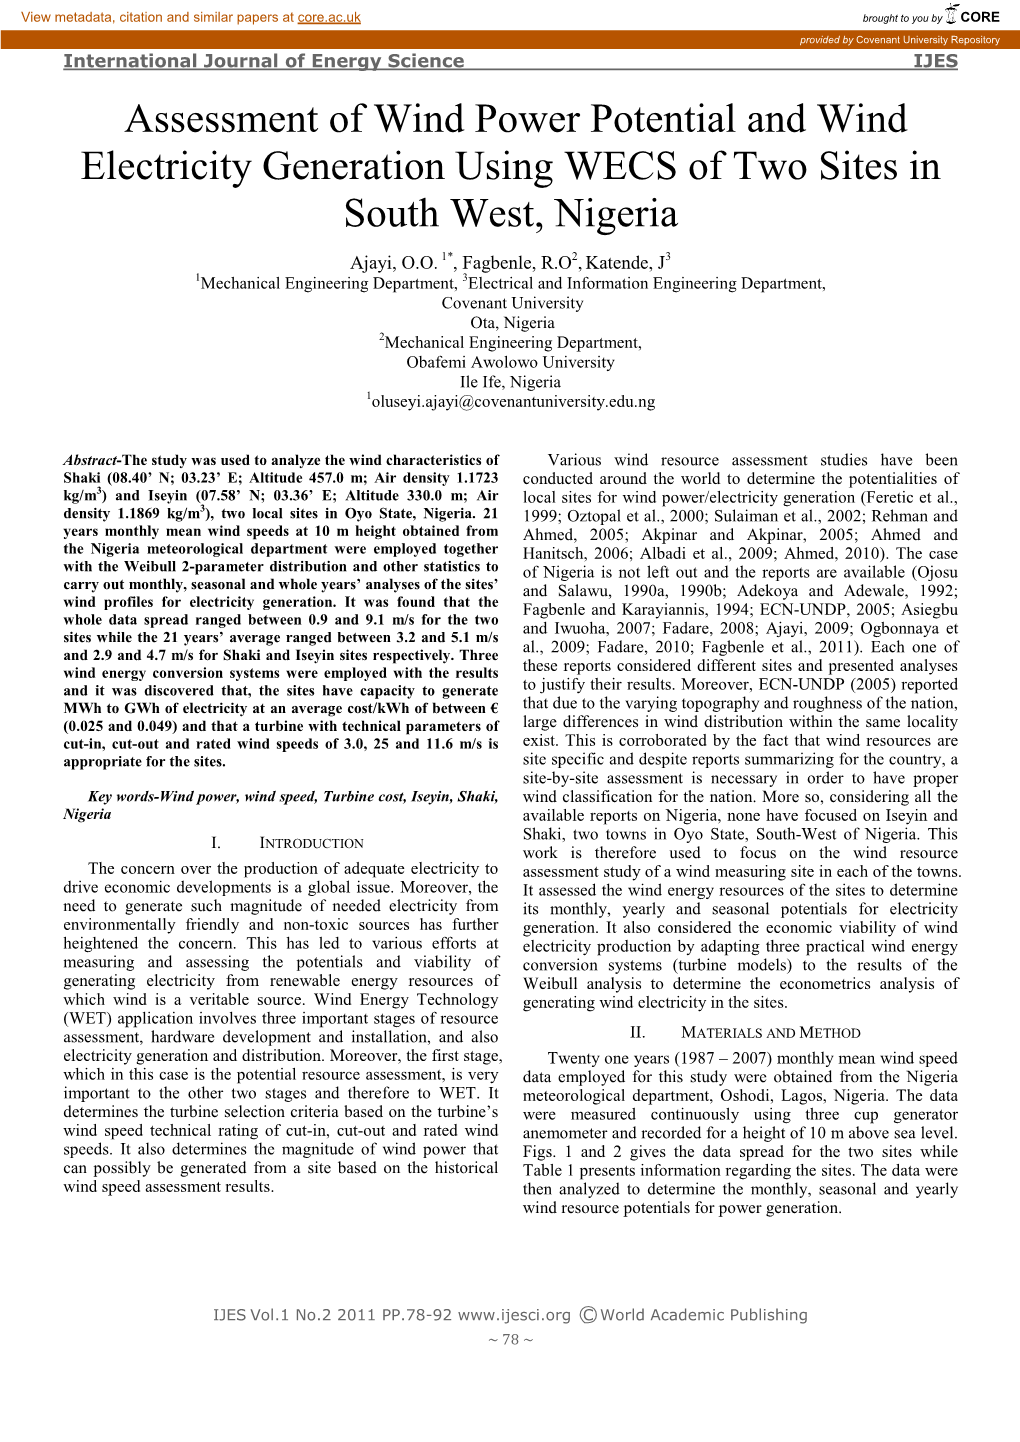 Assessment of Wind Power Potential and Wind Electricity Generation Using WECS of Two Sites in South West, Nigeria